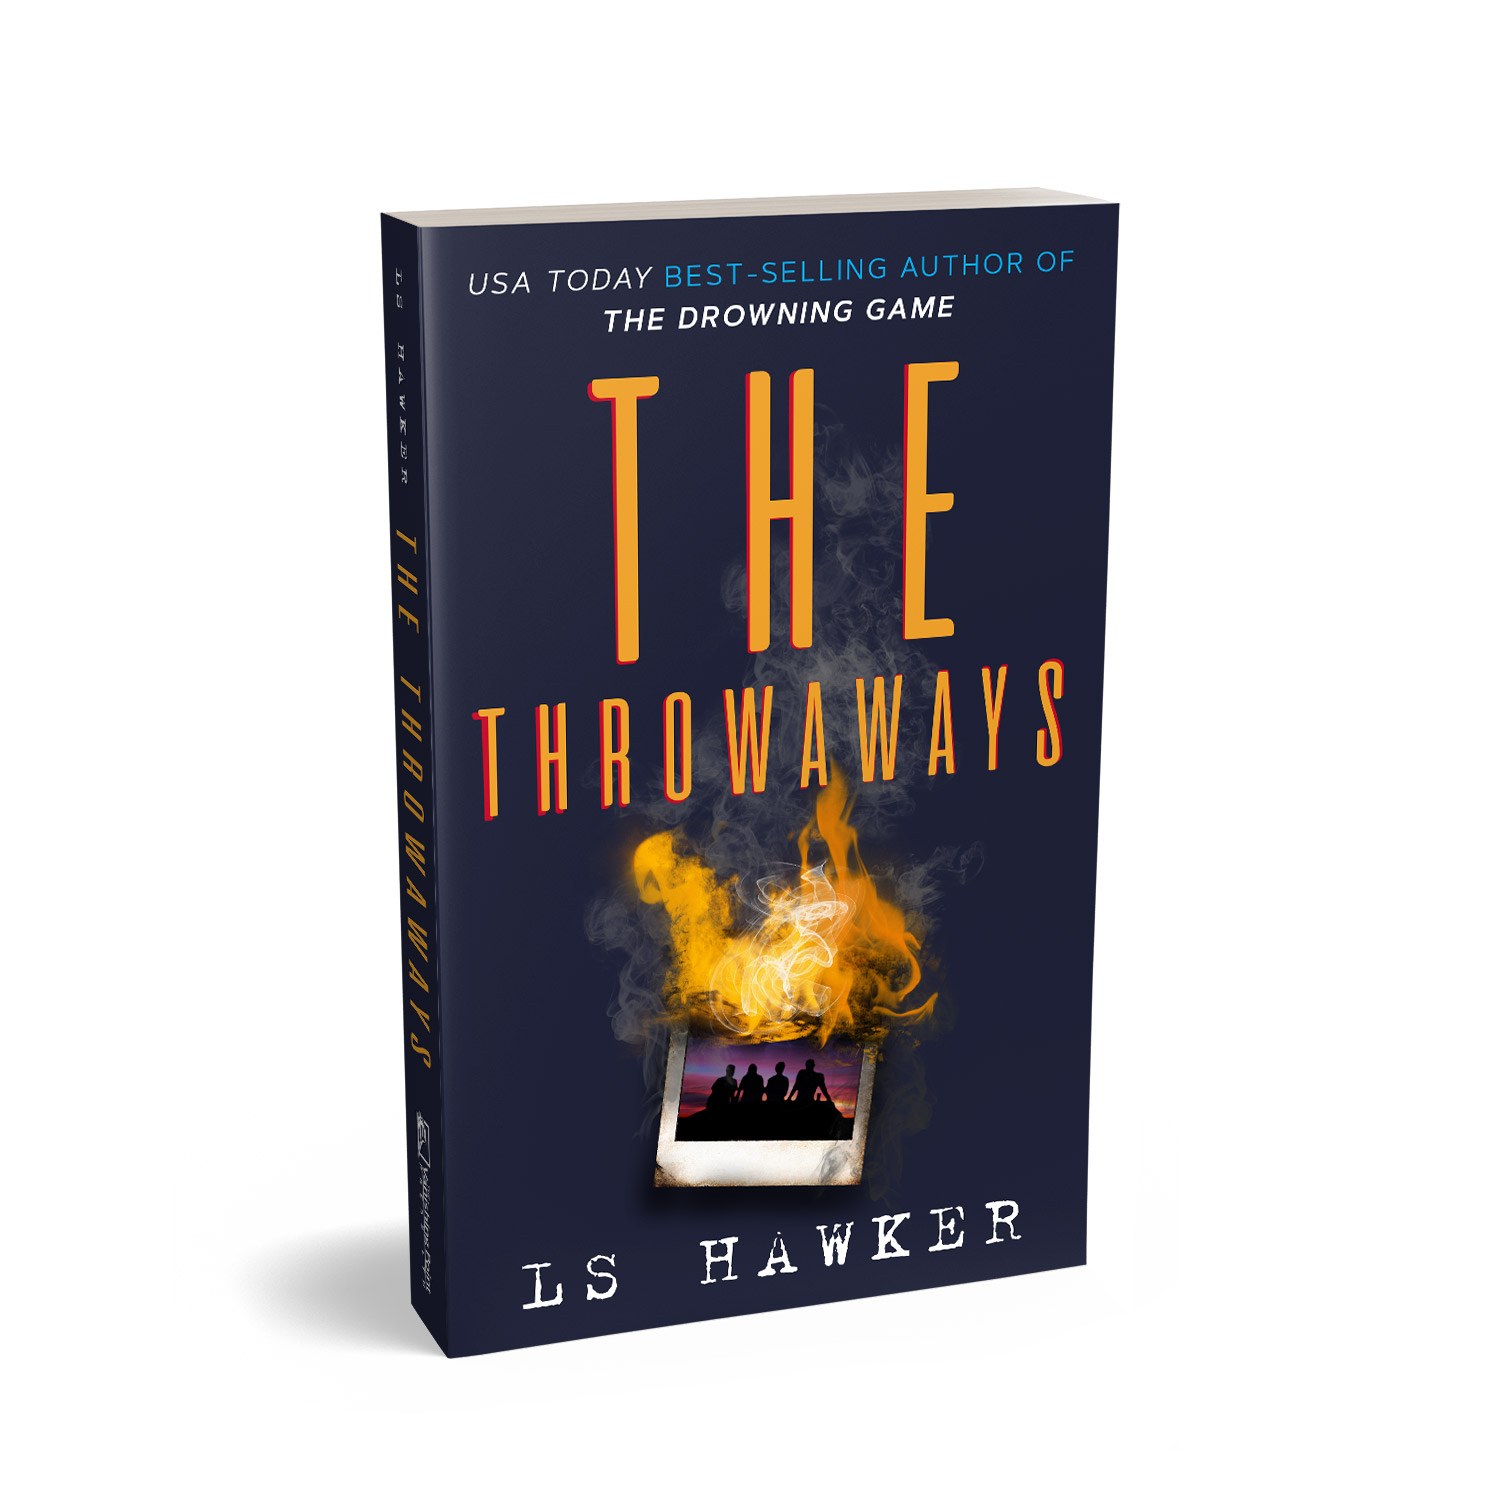 'The Throwaways' is a breakneck, 80s-set conspiracy thriller. The author is LS Hawker. The book cover and interior design are by Mark Thomas. To learn more about what Mark could do for your book, please visit coverness.com.